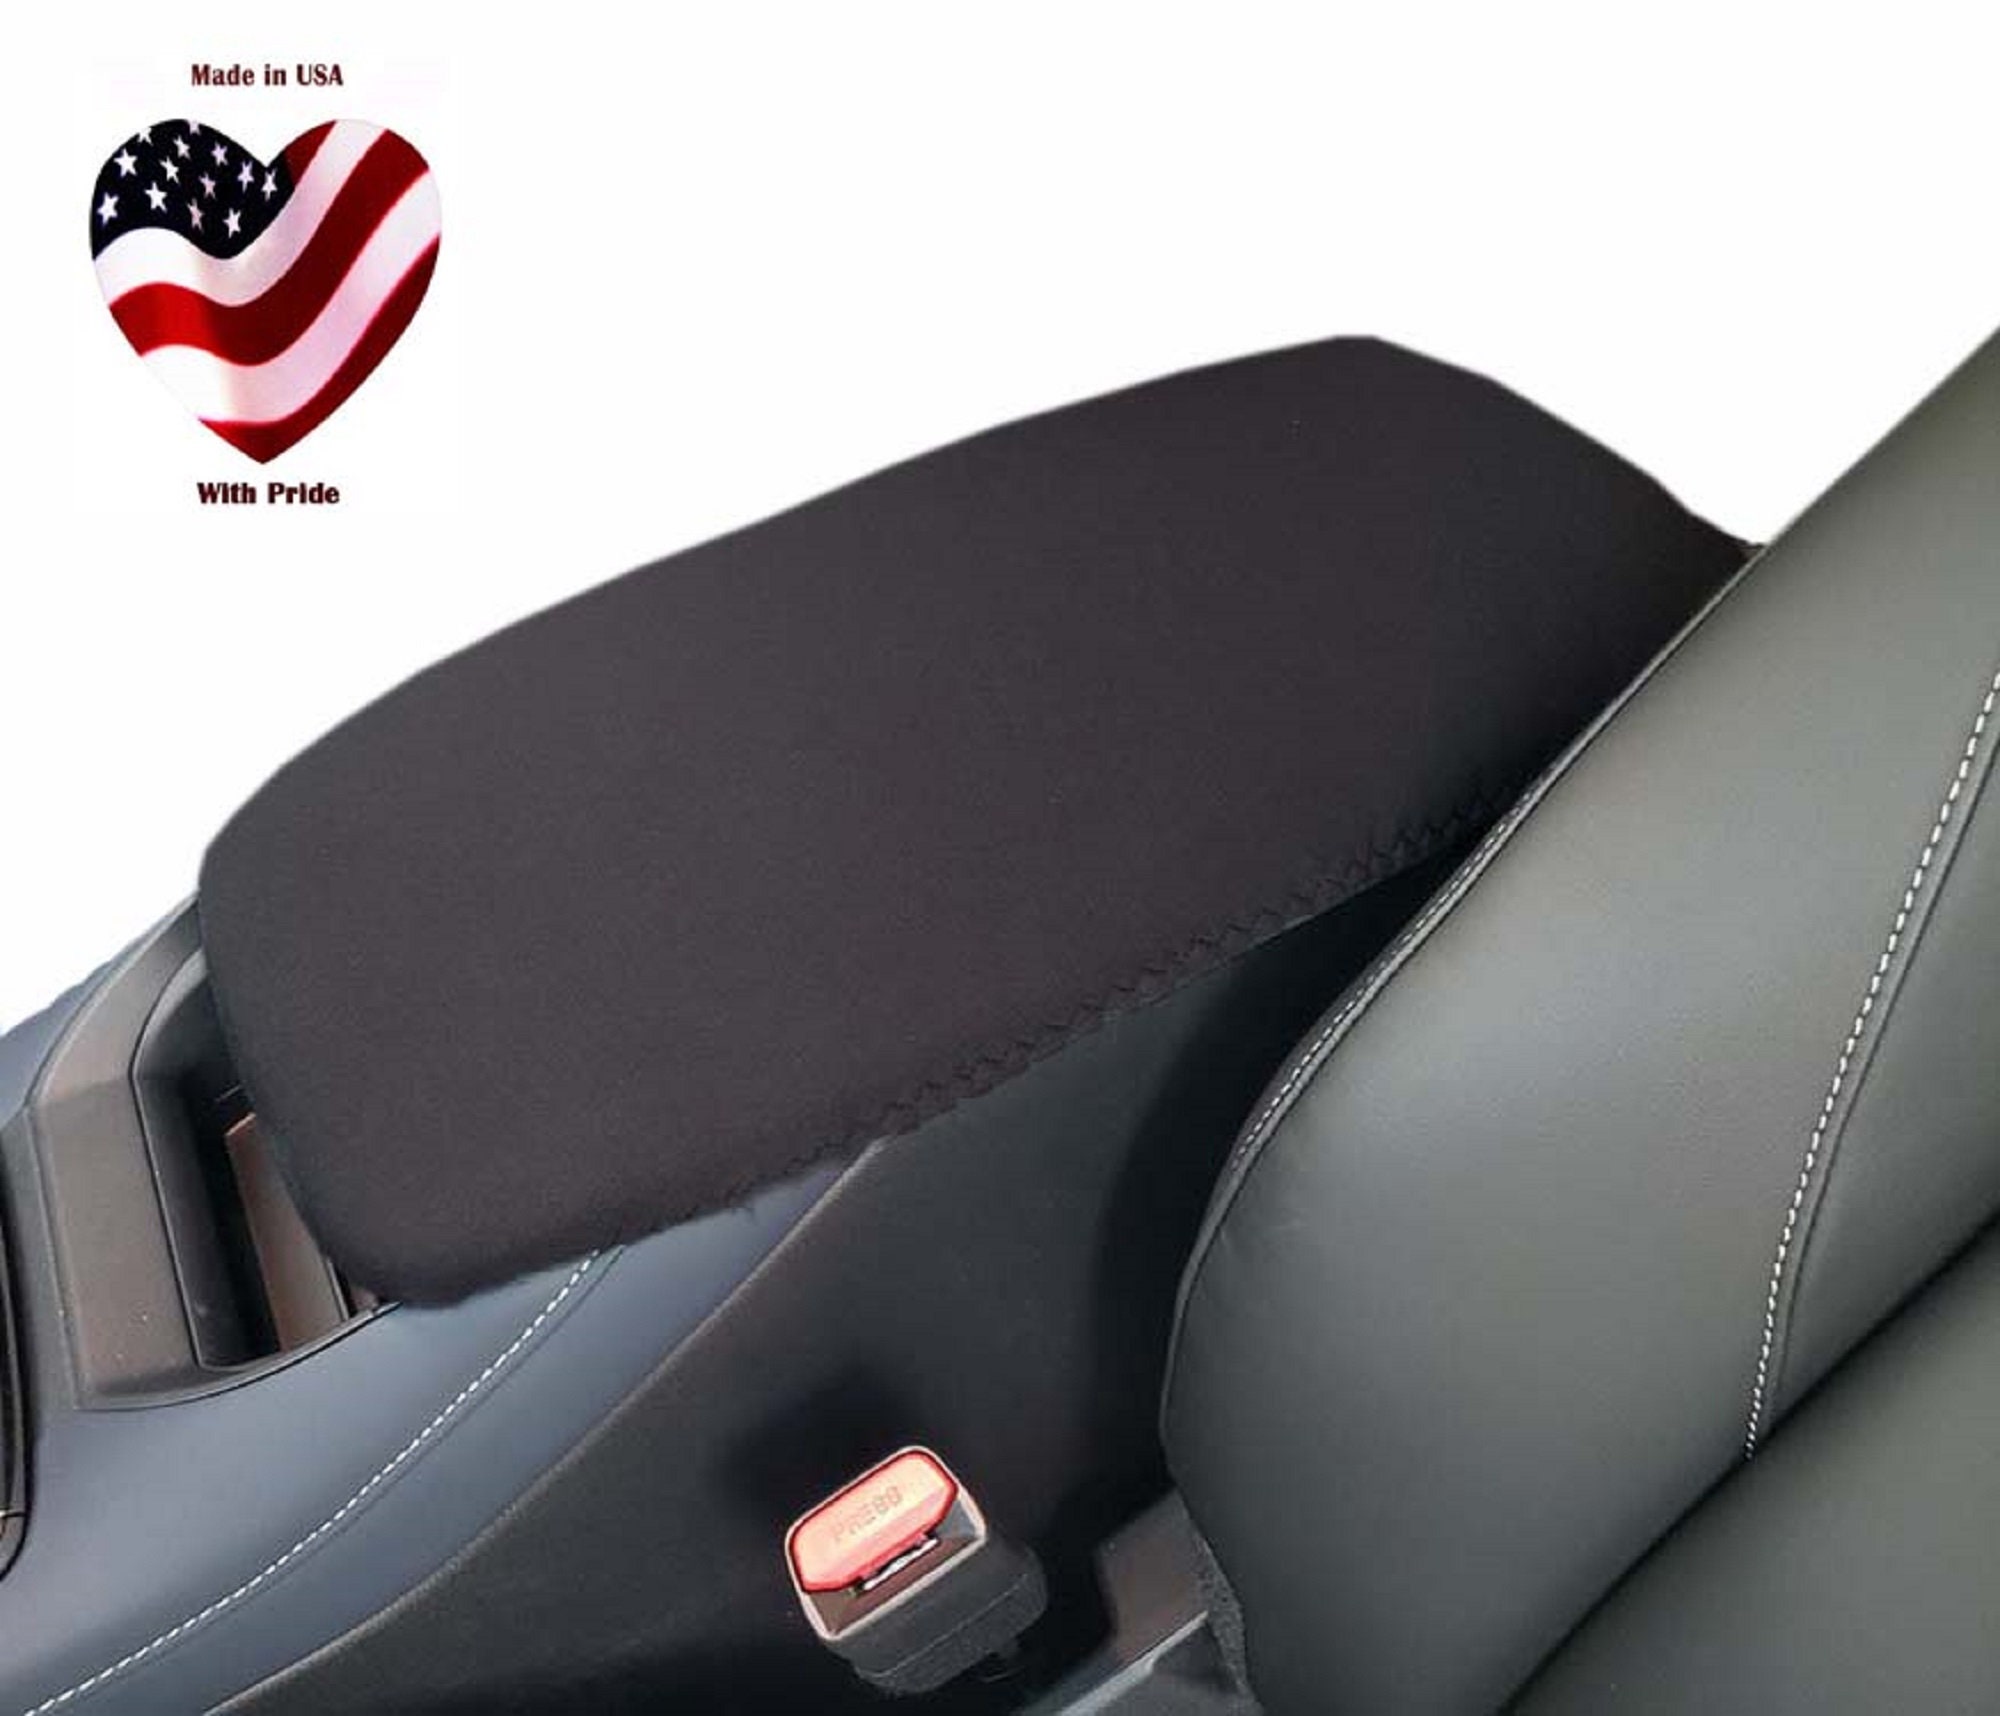  2 in 1 Car Armrest Box Booster Pad Tissue Holder, Leather Car  Center Console Cover, Arm Rest Cover for Car, Car Armrest Storage Box Cover  Mat, Center Console Lid, Car Interior